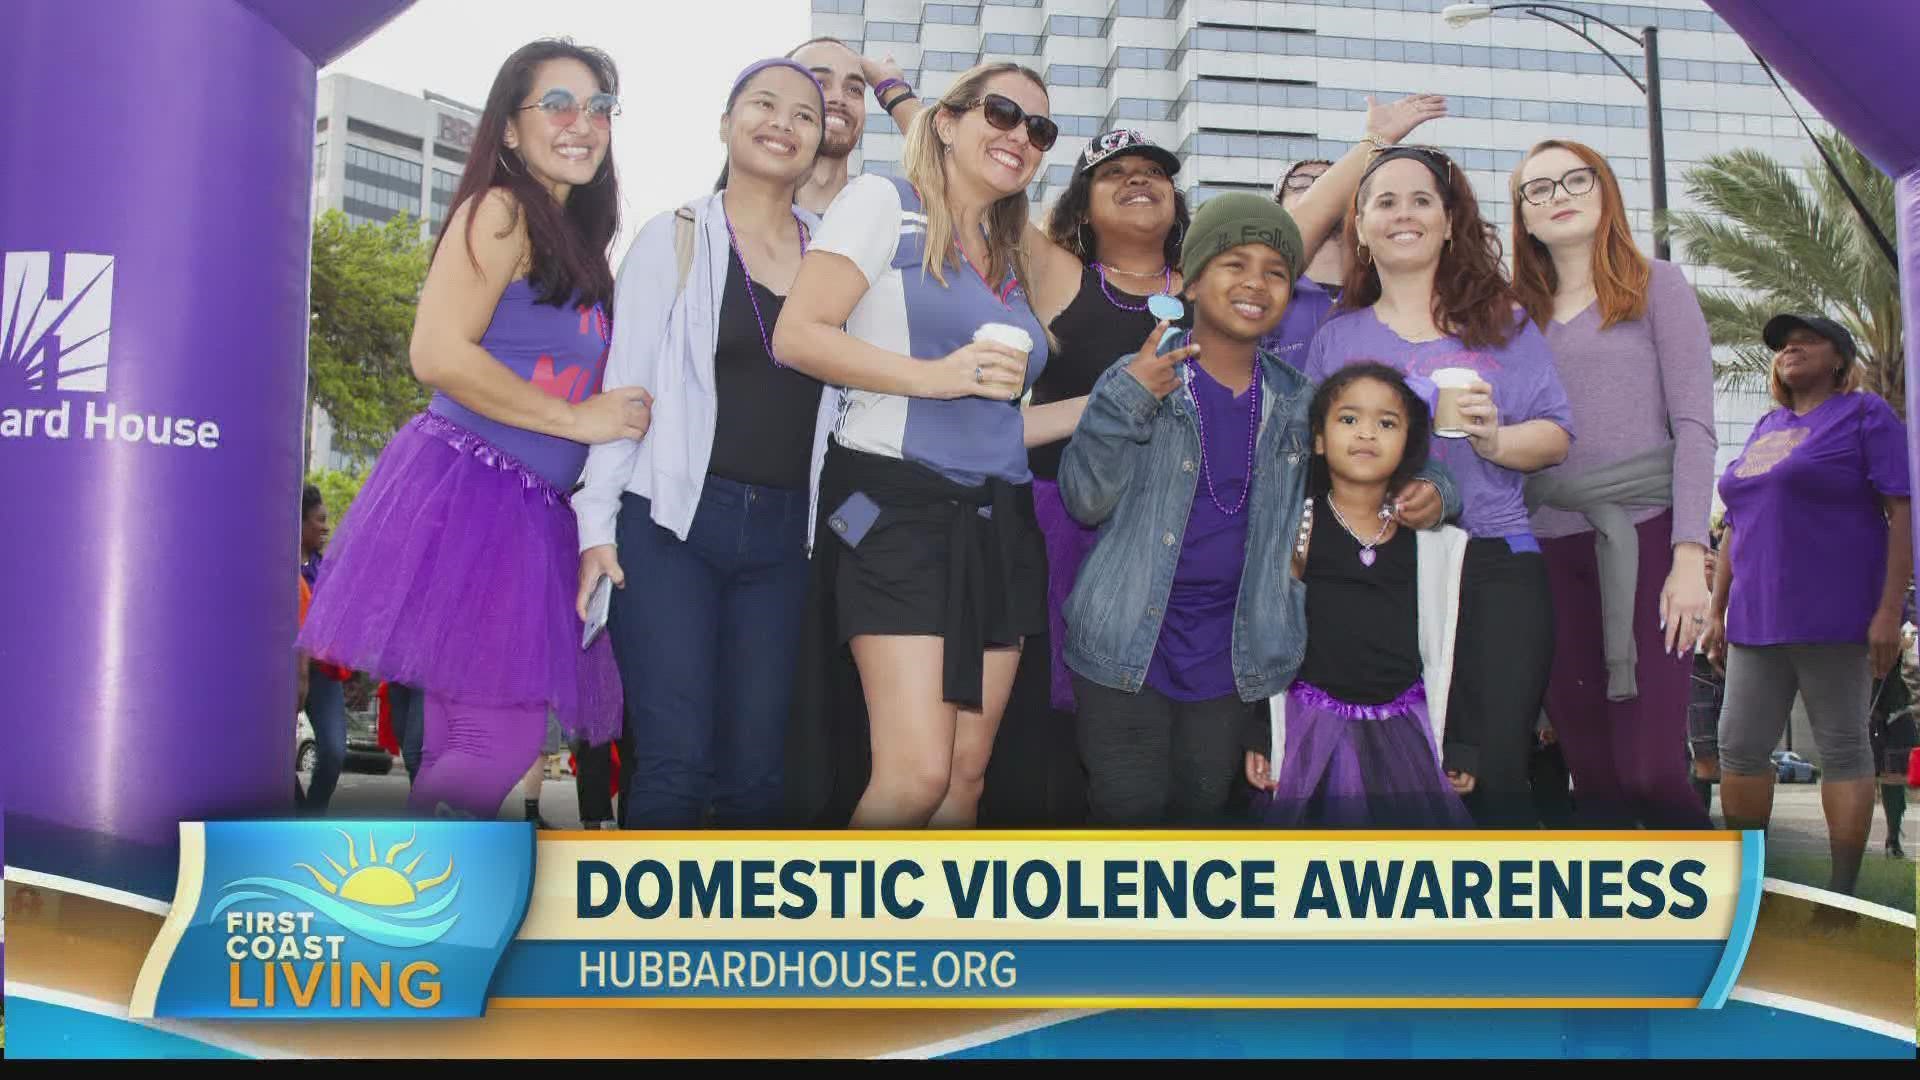 Hubbard House CEO, Dr. Gail Patin shares details on an upcoming event that benefits victims of domestic abuse.